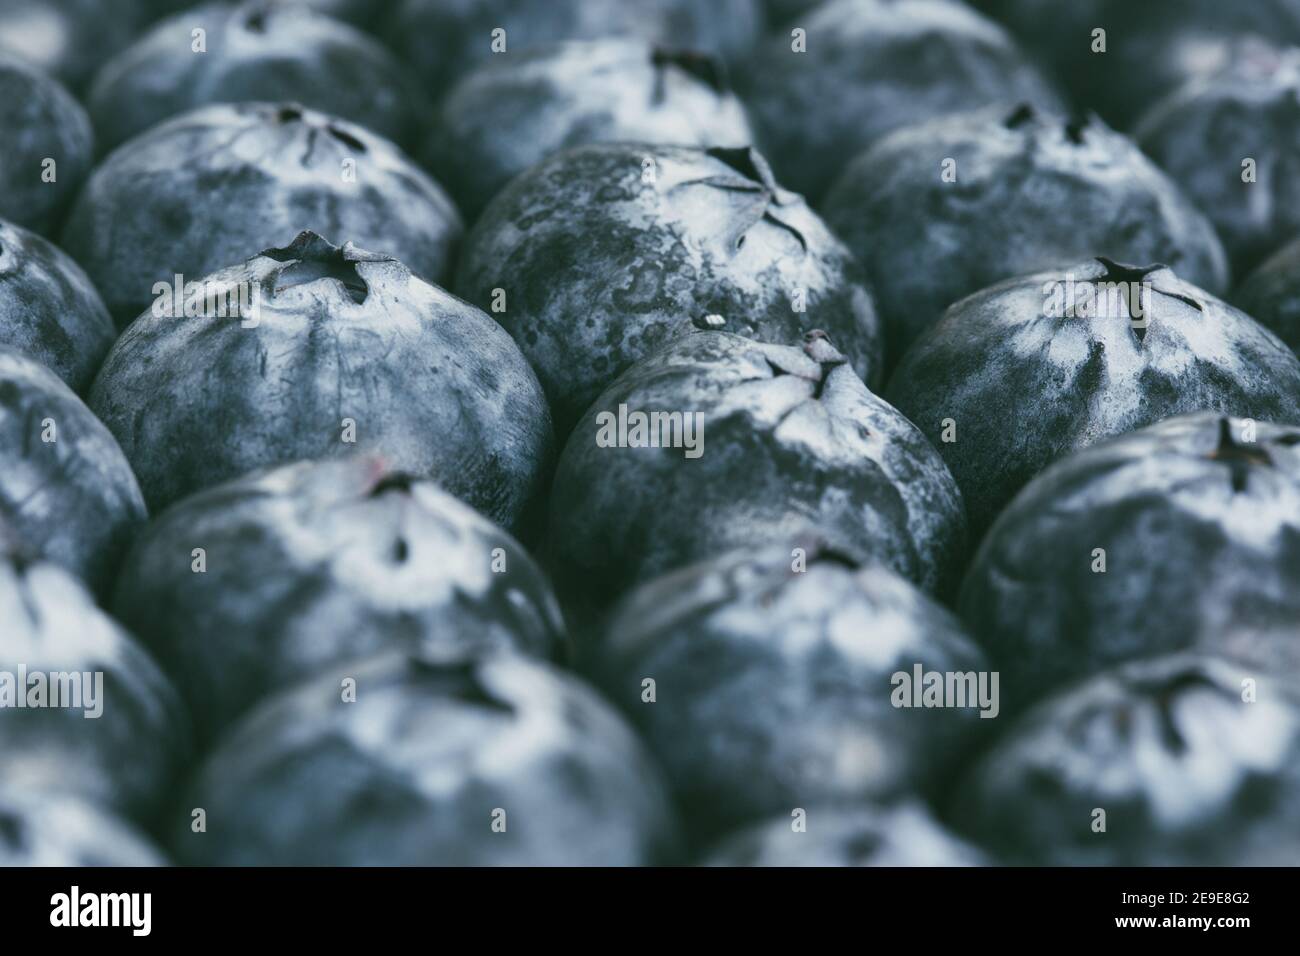 A full frame food fruit background of a close up of fresh, ripe blueberries packed together with copy space Stock Photo